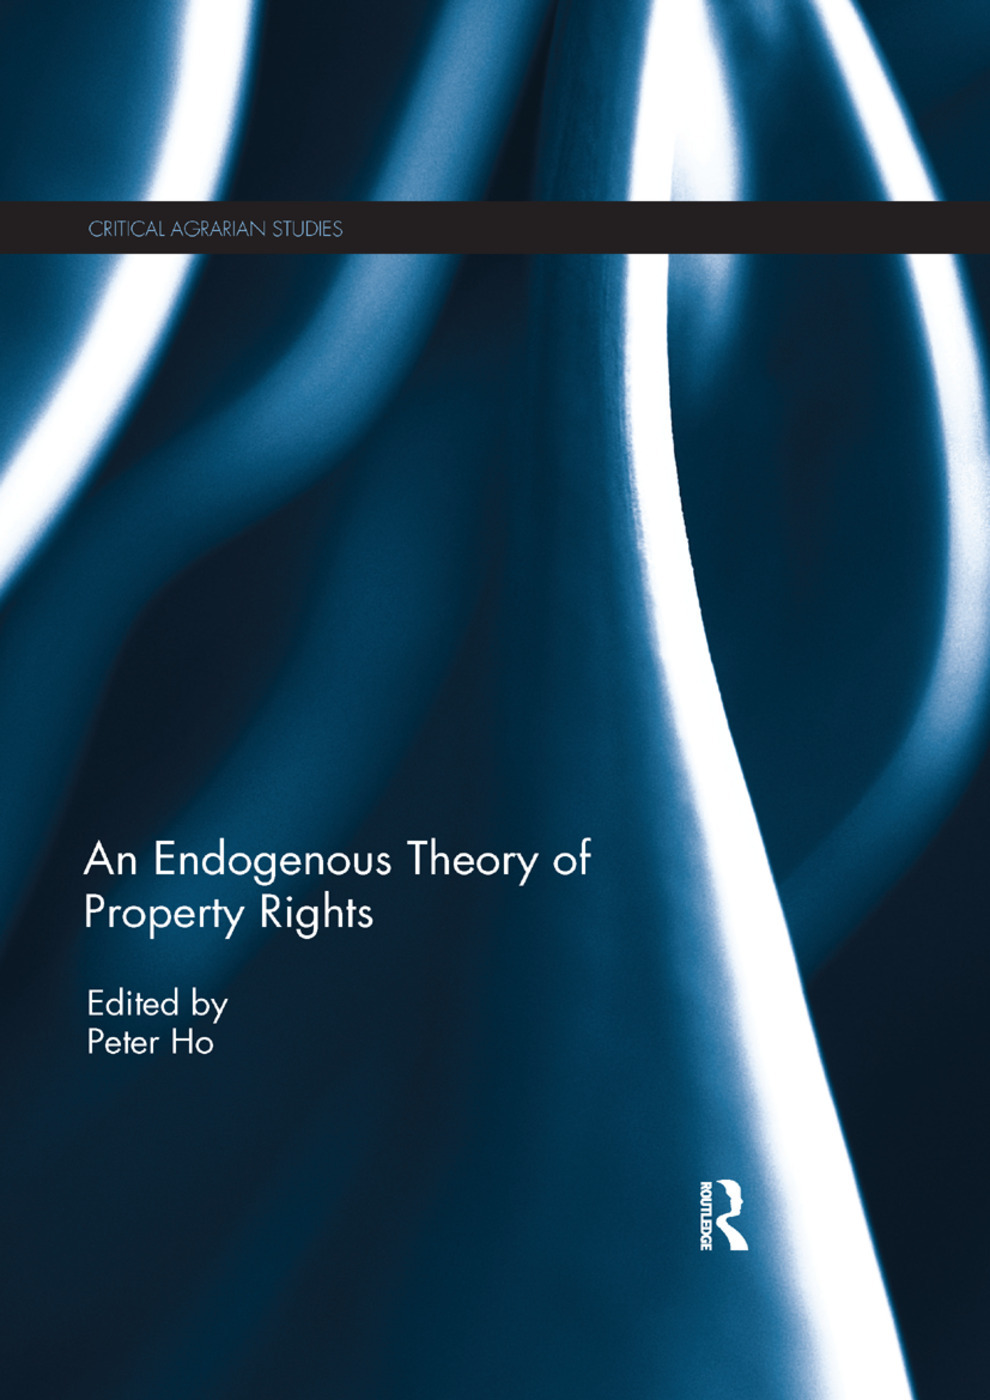 An Endogenous Theory of Property Rights (Edited by Peter Ho) Promo Image